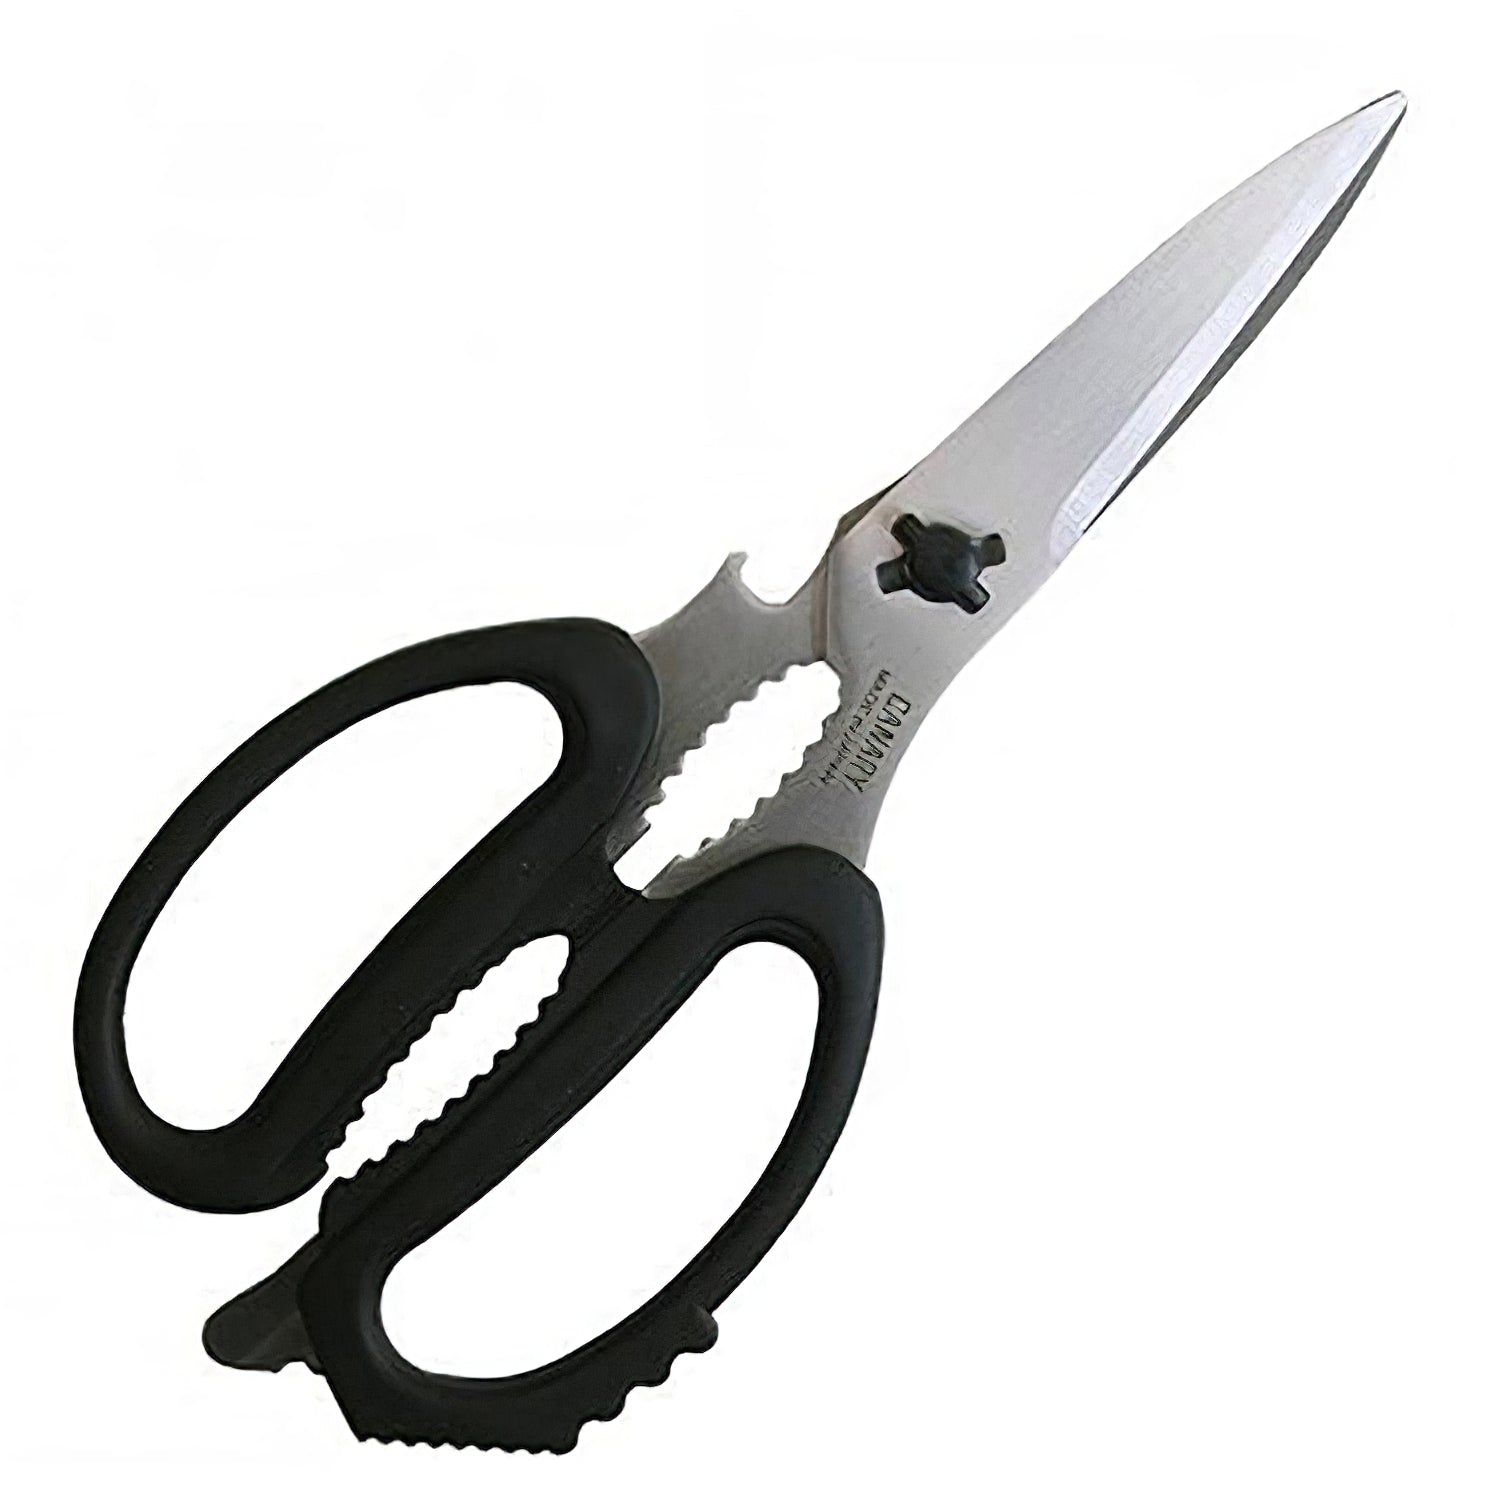 CANARY Japanese Kitchen Scissors Heavy Duty 8.2, Made in JAPAN, Dishwasher  Safe Come Apart Blade, Multipurpose Kitchen Scissors, Sharp Serrated